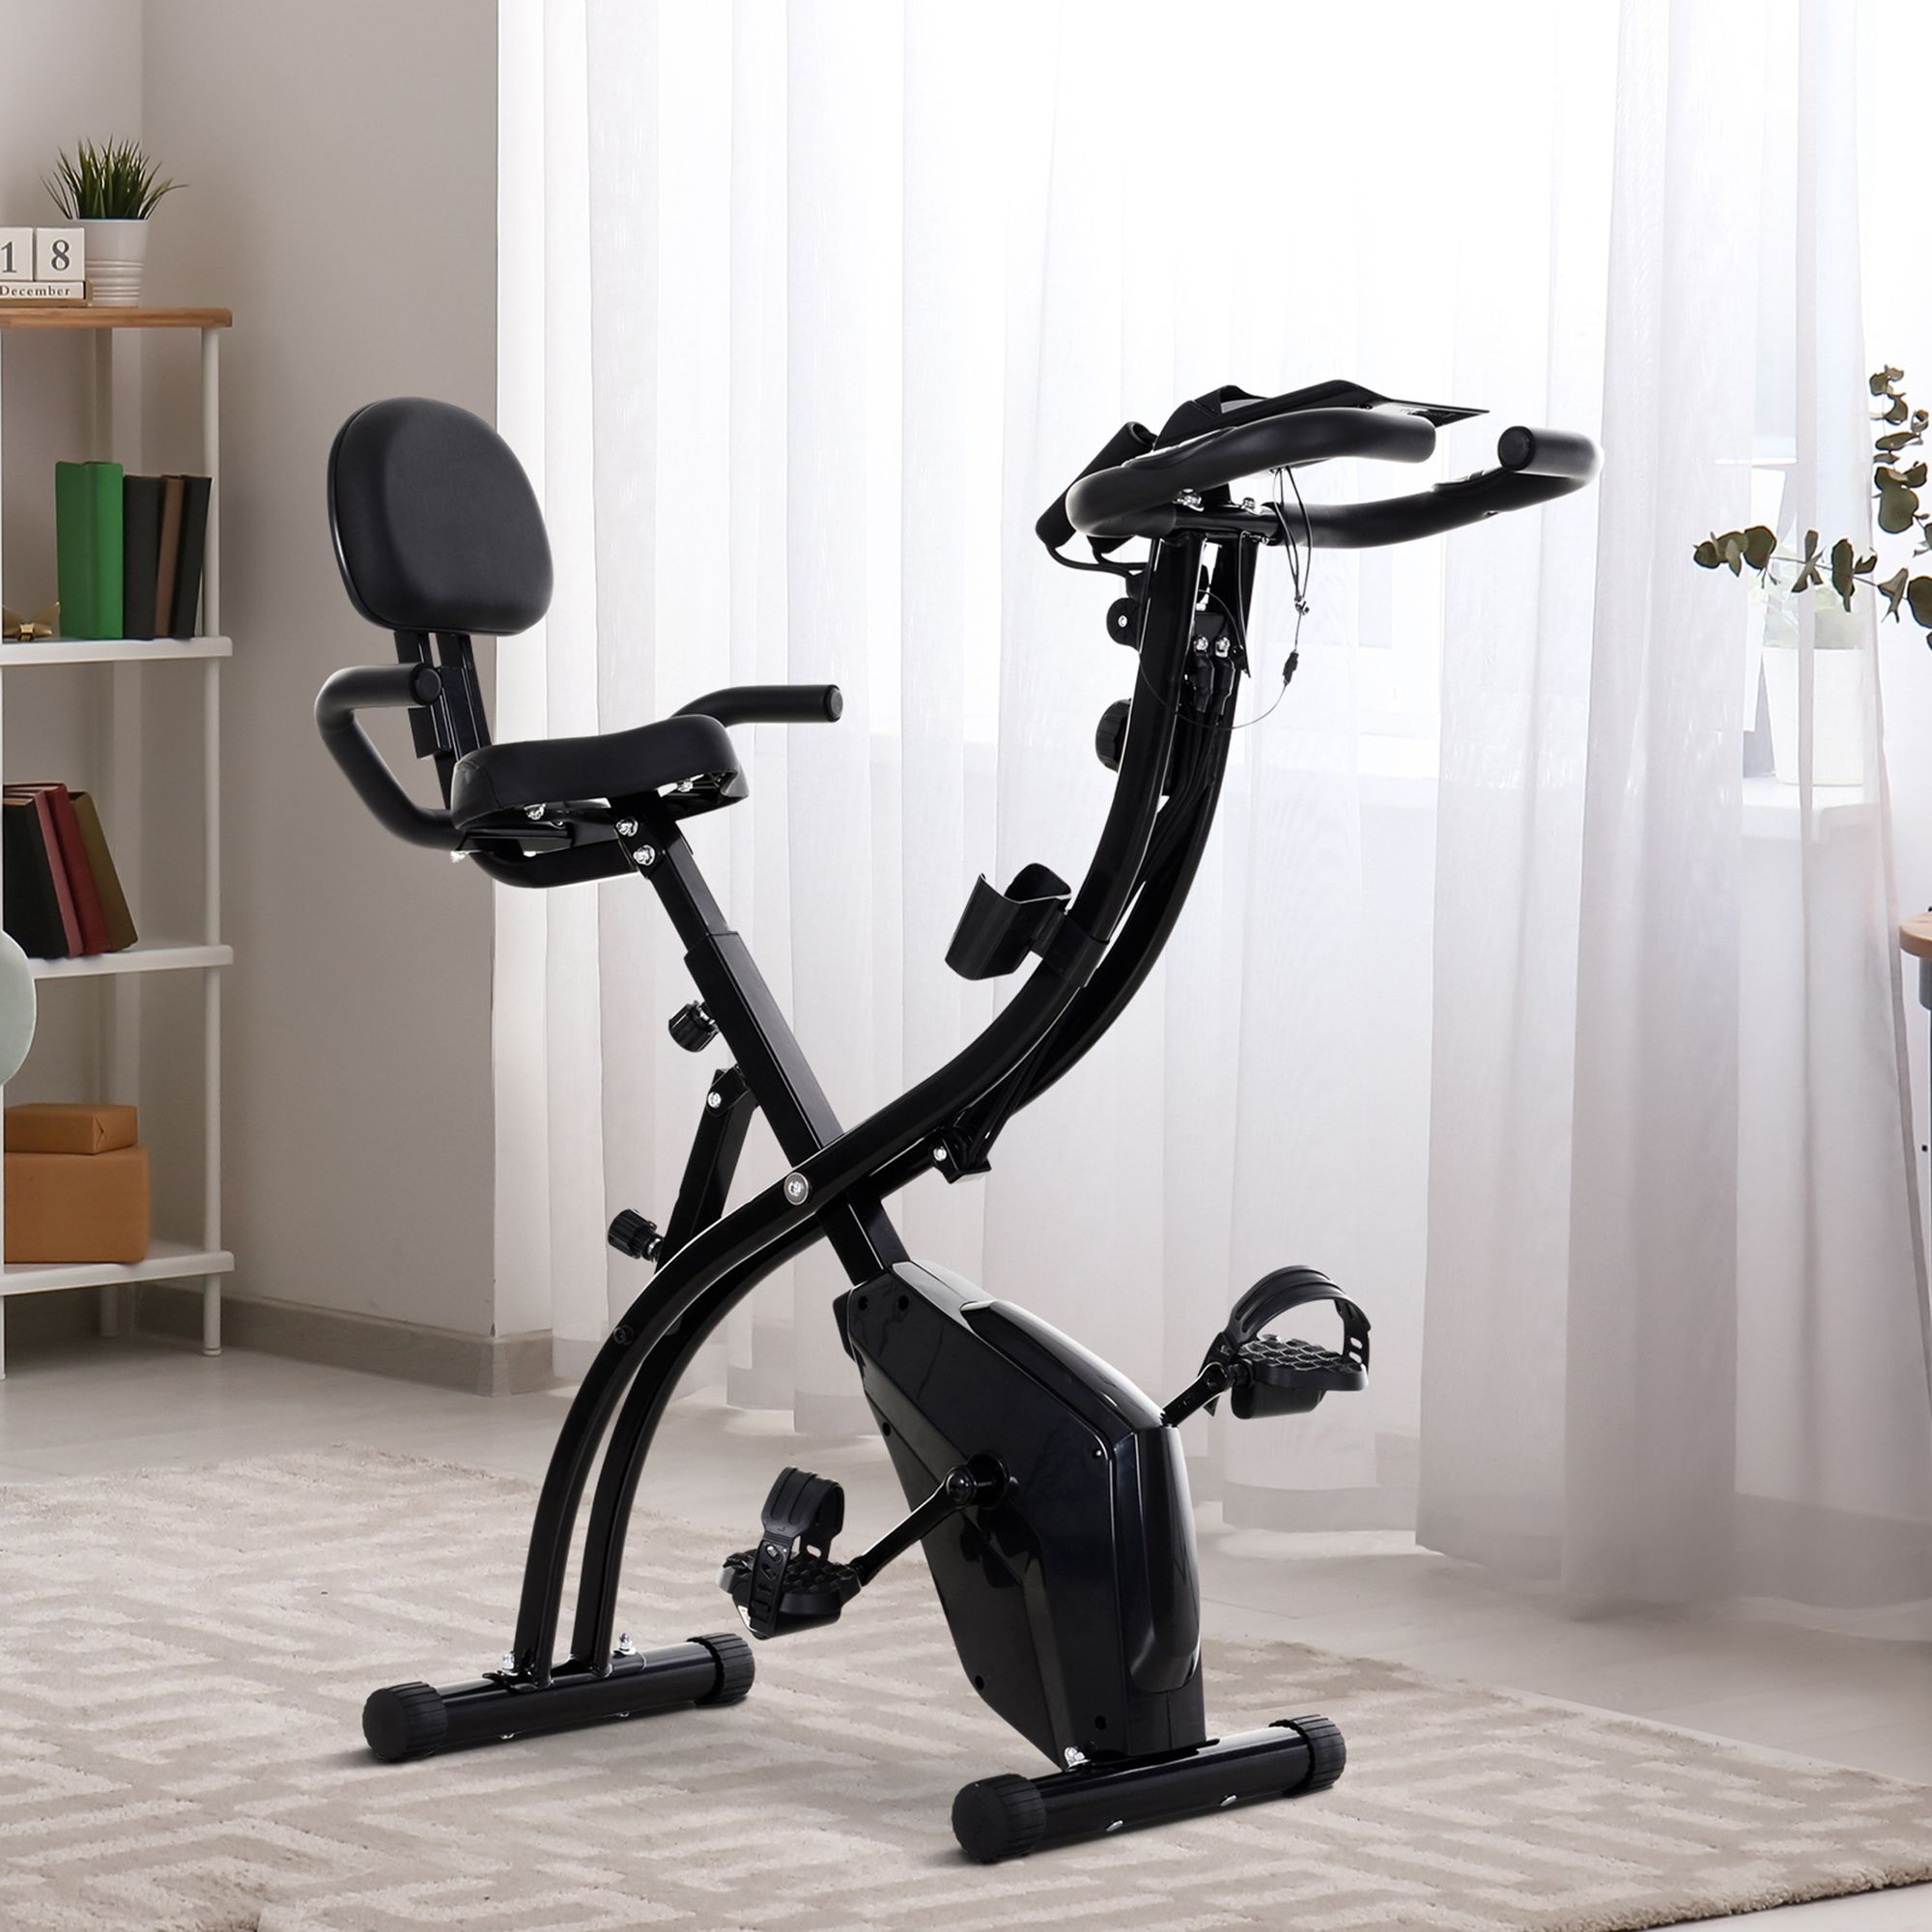 2in1 Arm Leg Trainer Mini Home Exercise Bike Fitness Sport Cycle Pedal Black New 